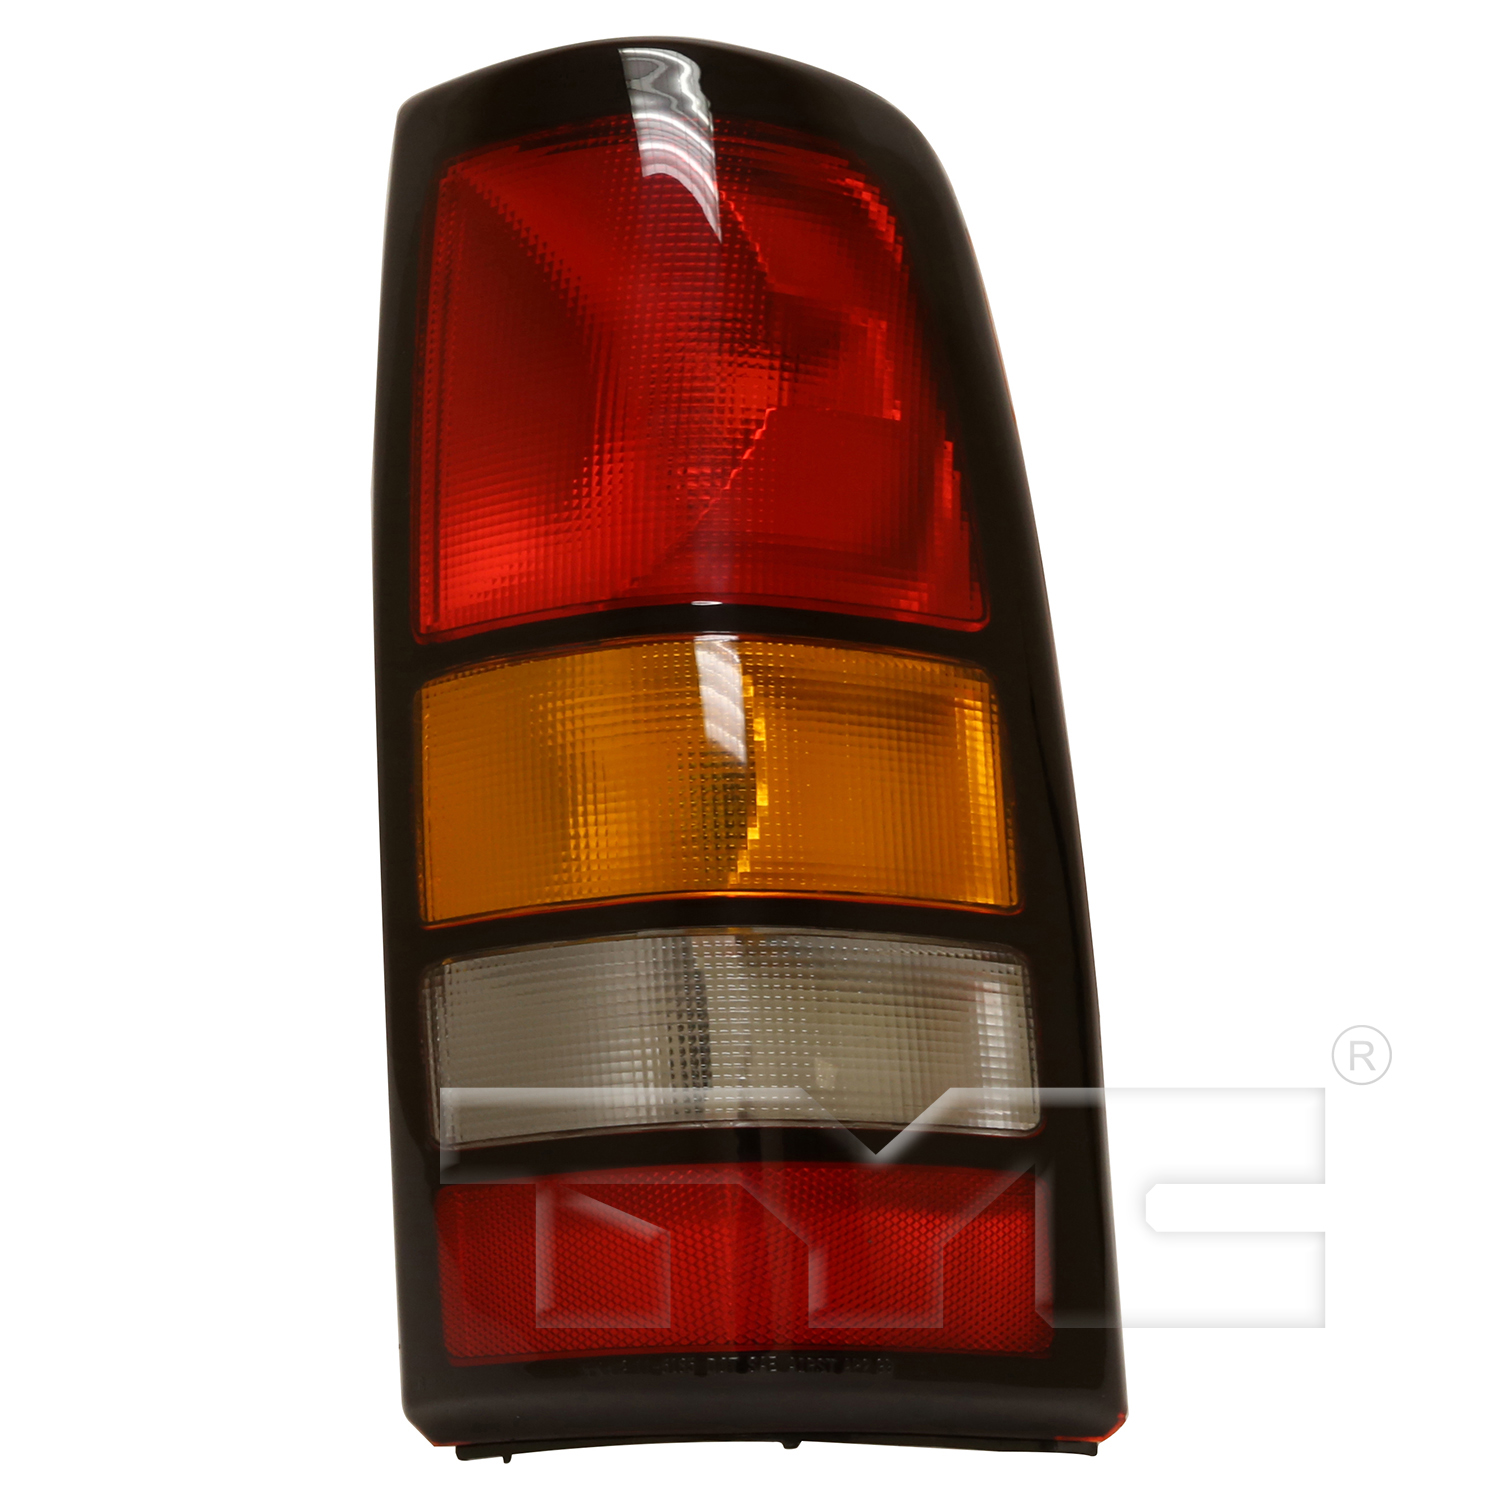 Aftermarket TAILLIGHTS for GMC - SIERRA 1500, SIERRA 1500,04-06,RT Taillamp assy